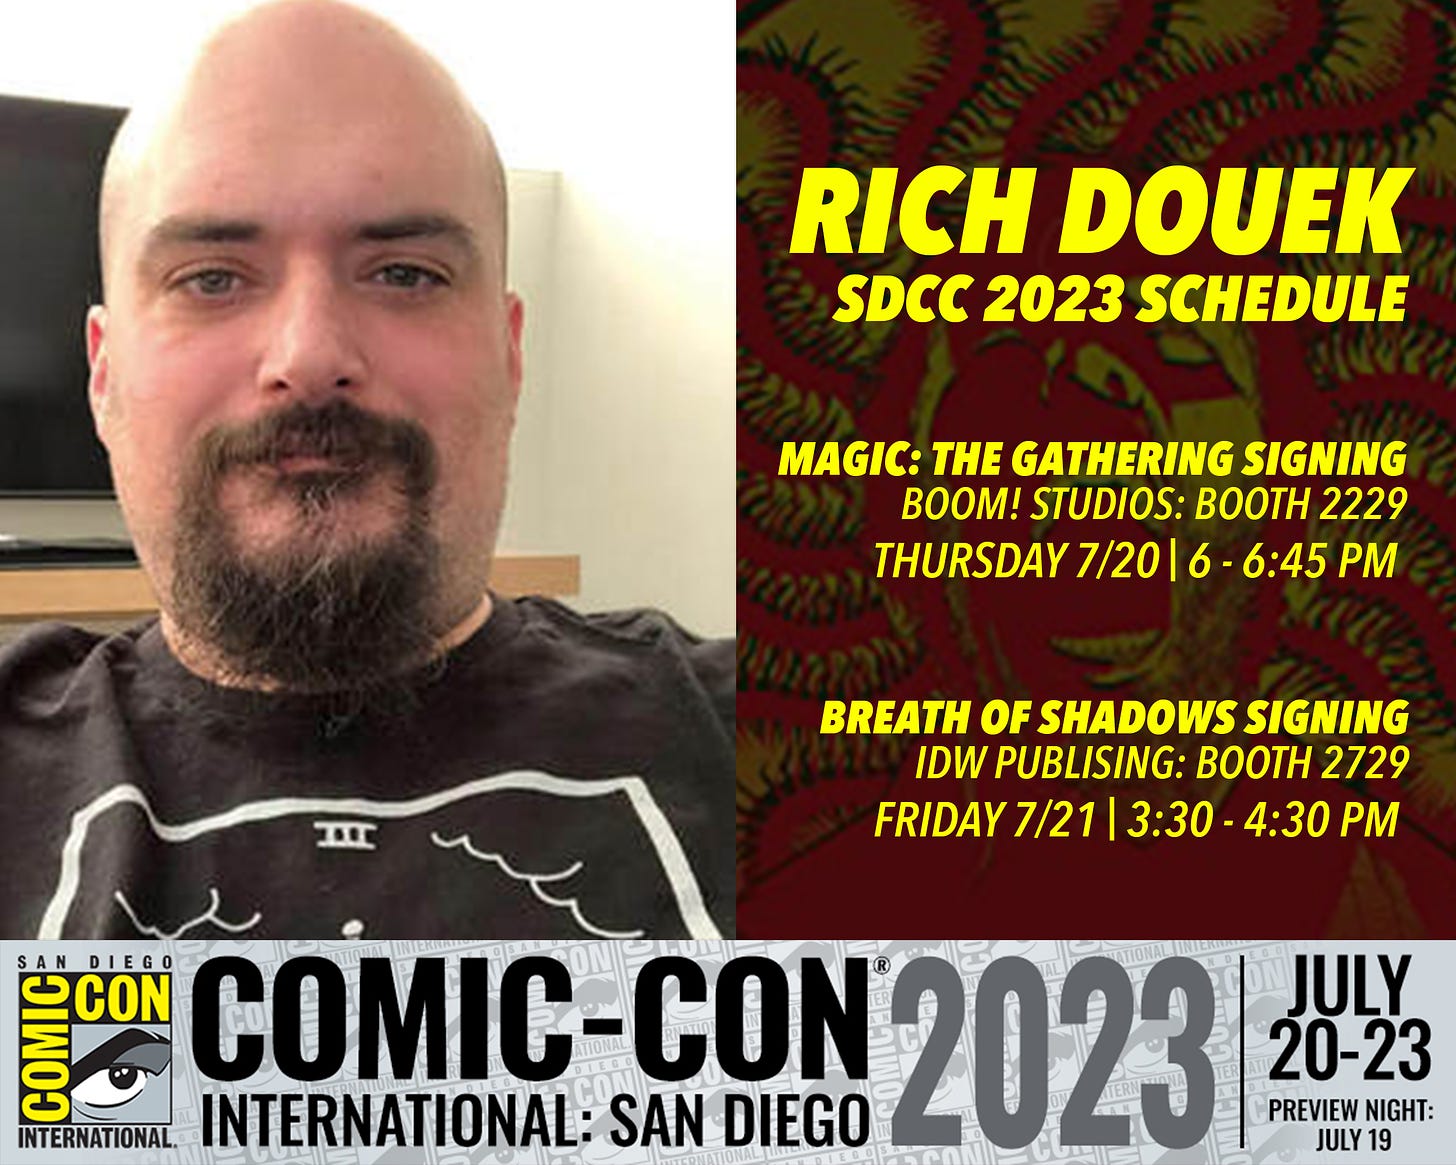 Rich Douek Signing Schedule: Thursday 7/20, 6-6:45 at Boom Studios Booth 2229, Friday 7/21 from 3:30-4:30 at IDW booth 2729